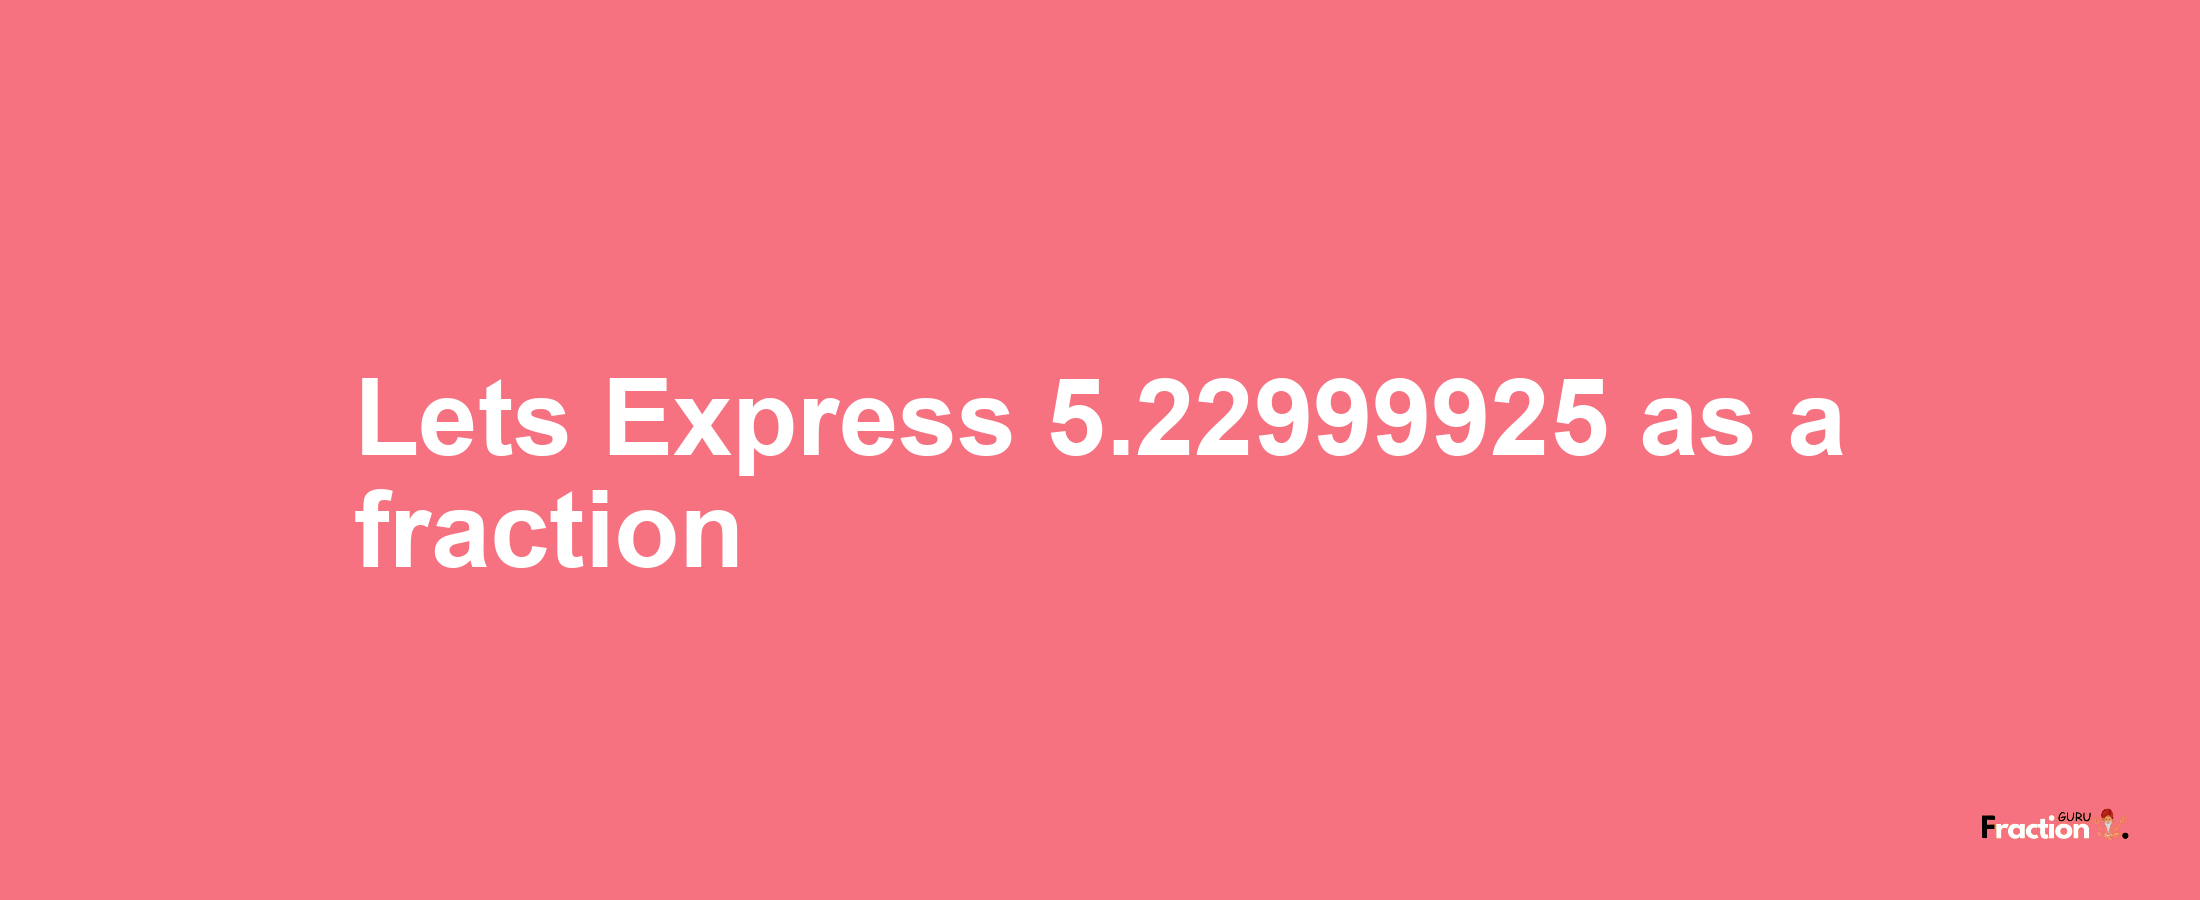 Lets Express 5.22999925 as afraction